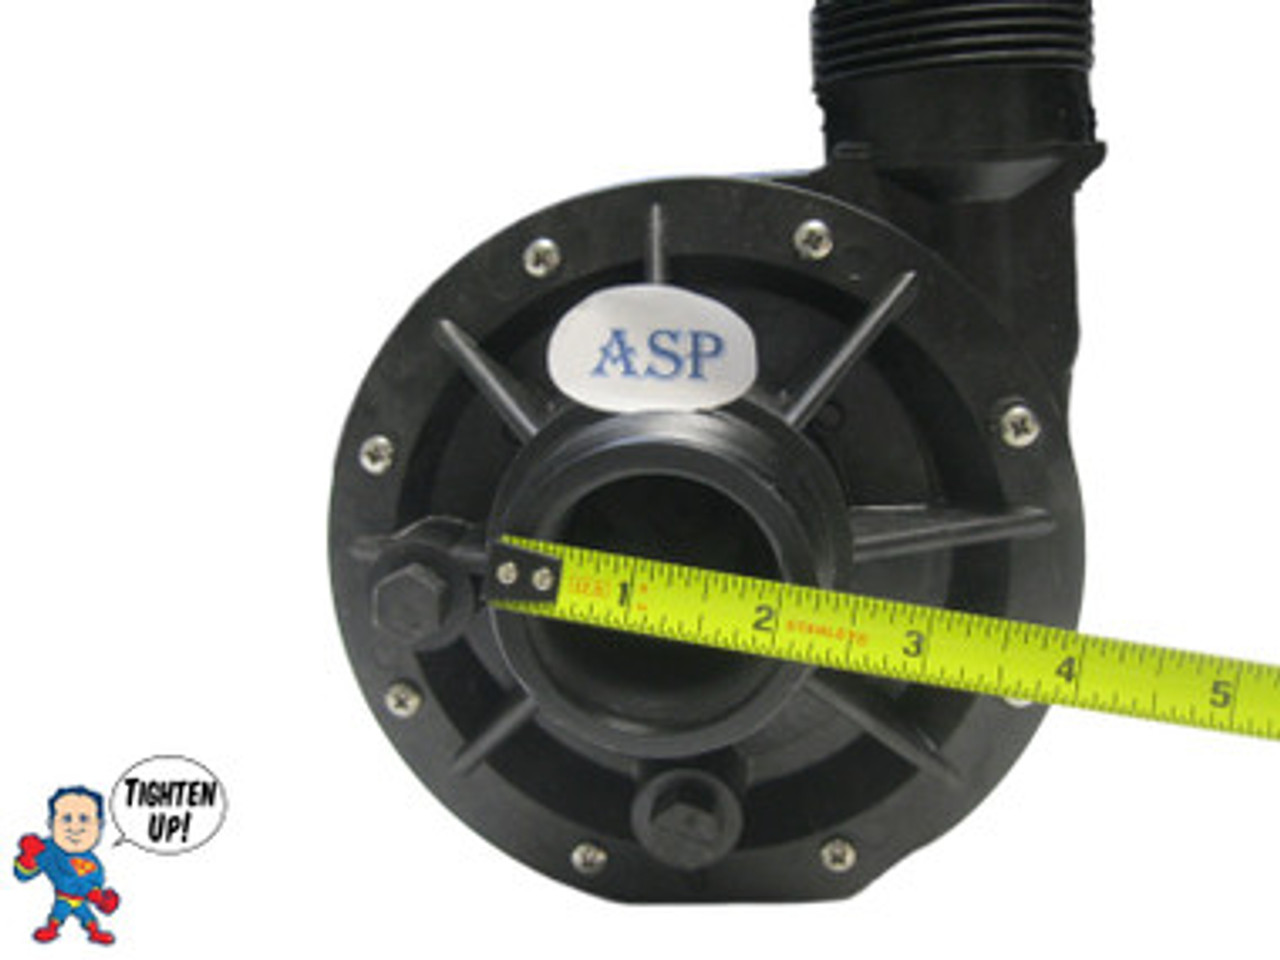 Wet End, Aqua-Flo, FMHP, 1.0HP, 1-1/2", 48 frame, 8.0A/230V, 12A/115v
The Suction and Pressure sides both Measure about 2-3/8" Across the threads and is called 1 ½”!